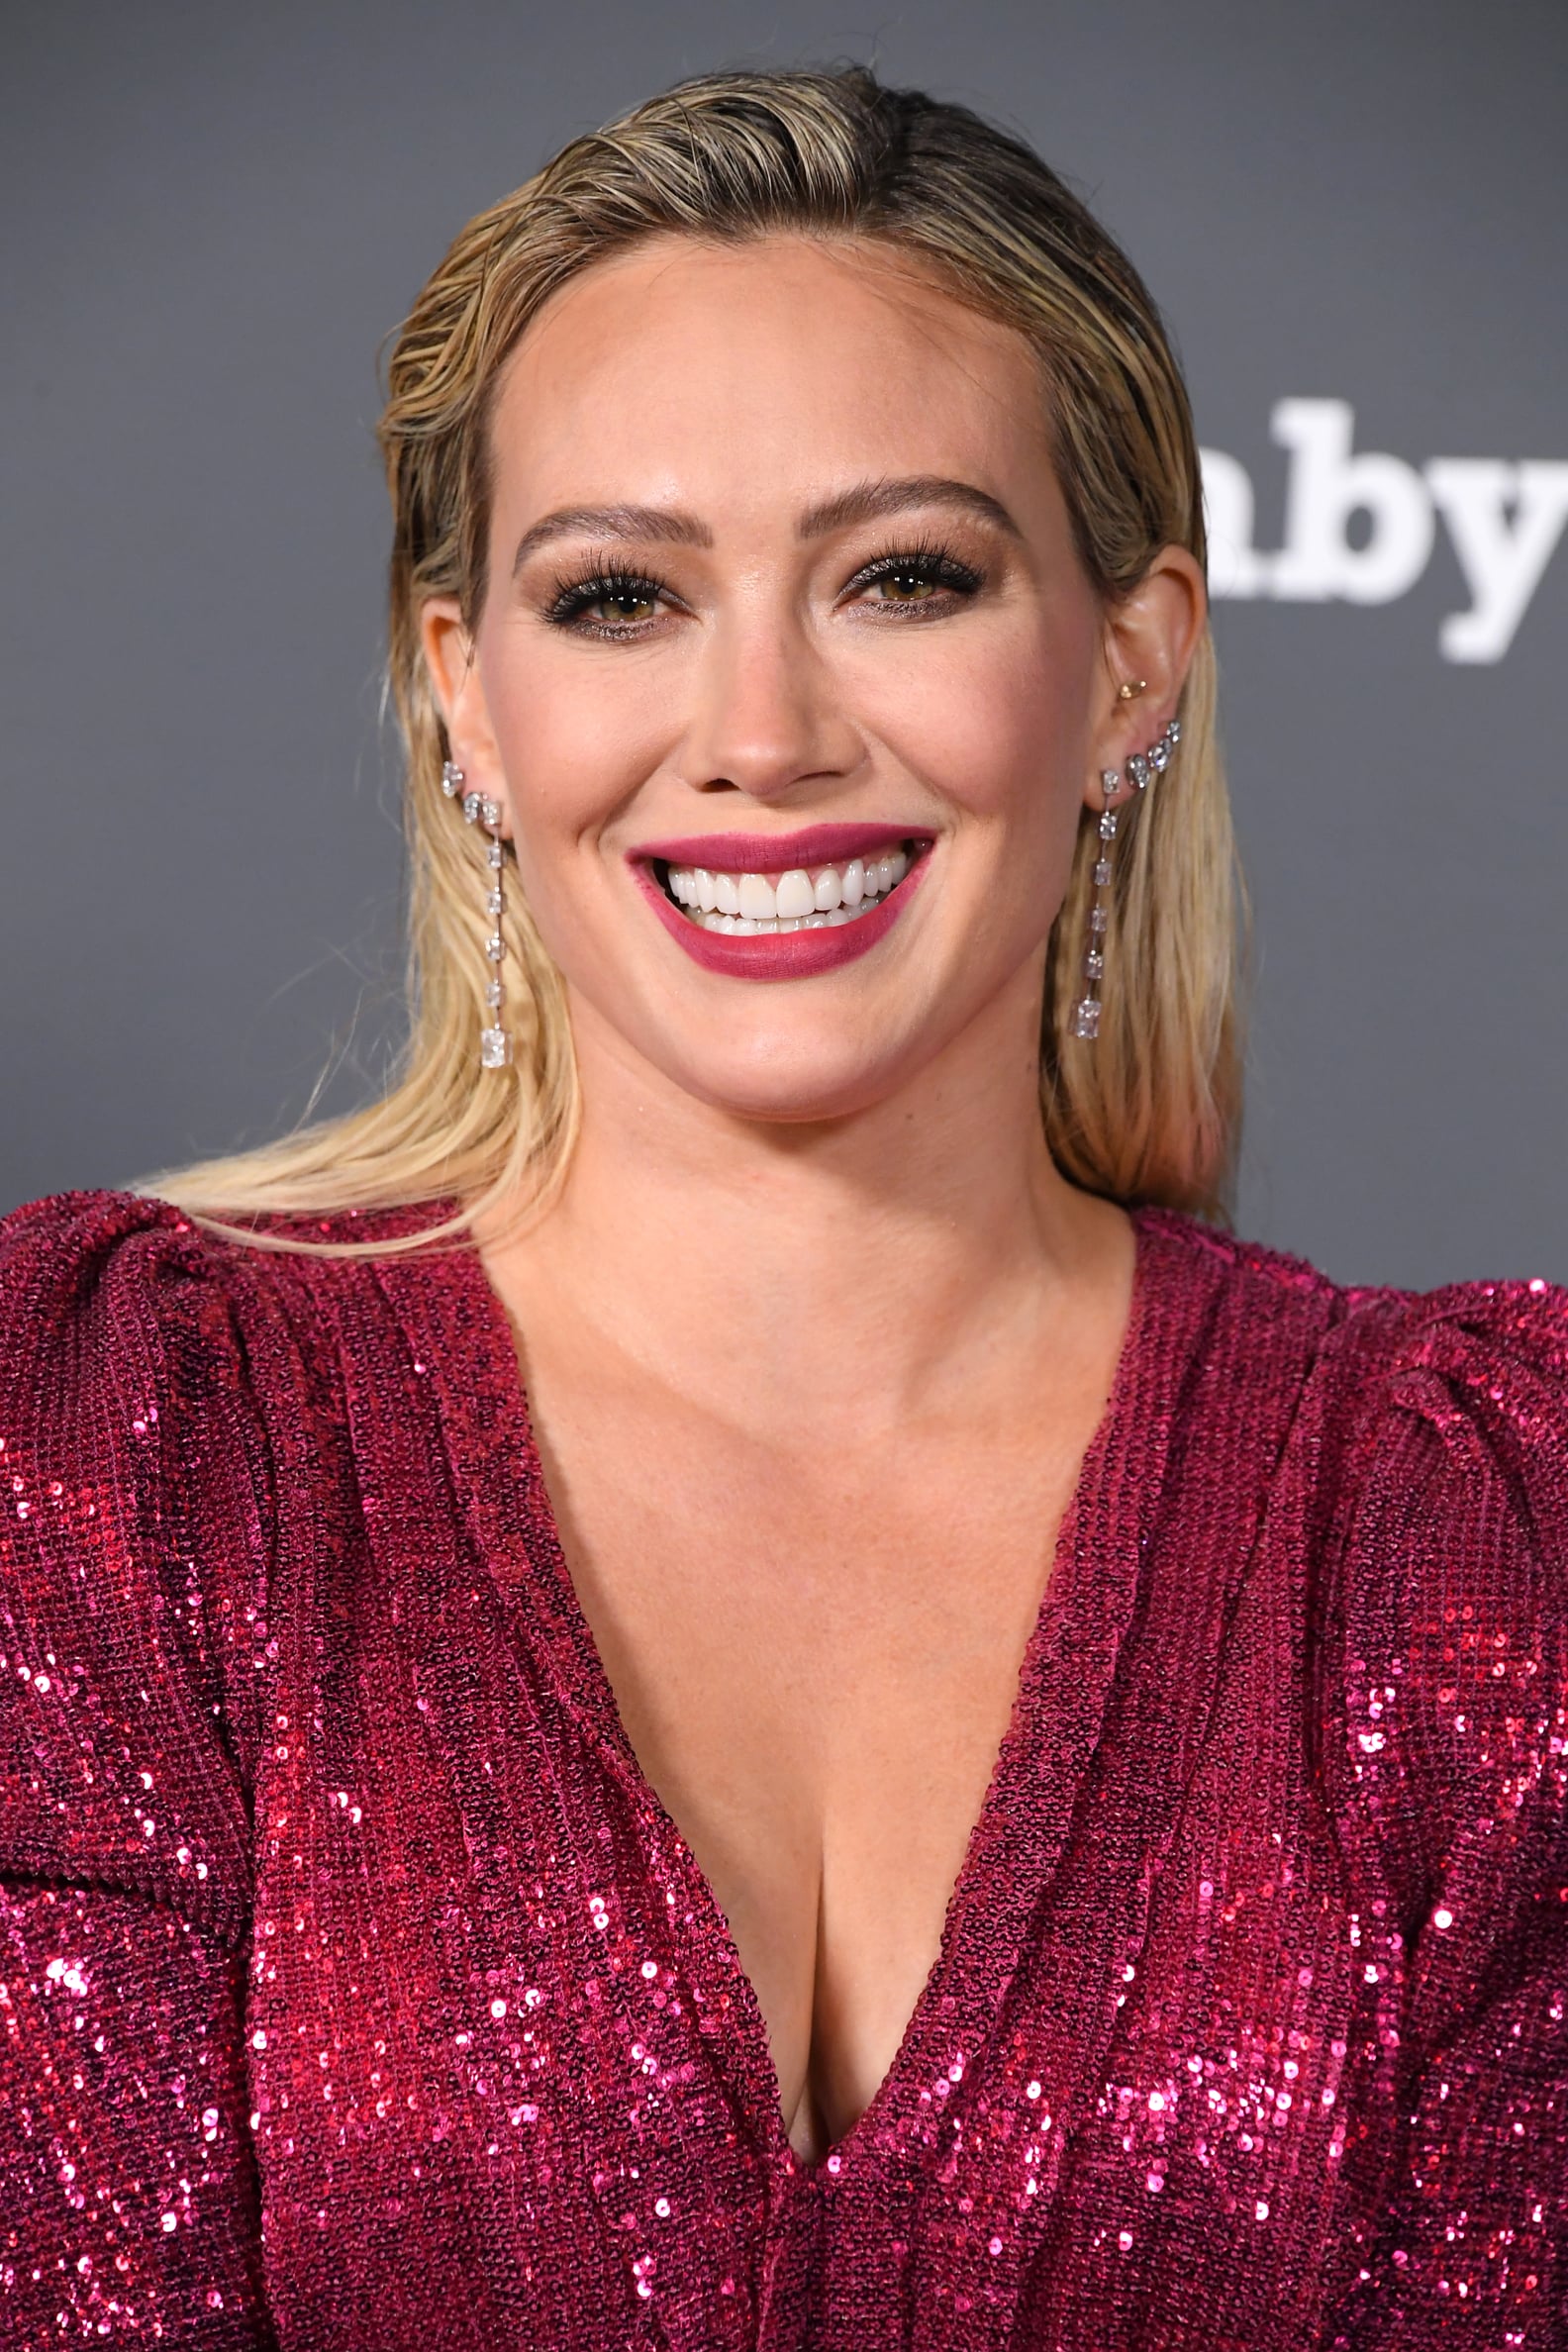 Hilary Duff Opens Up About Horrifying Eating Disorder Popsugar Fitness